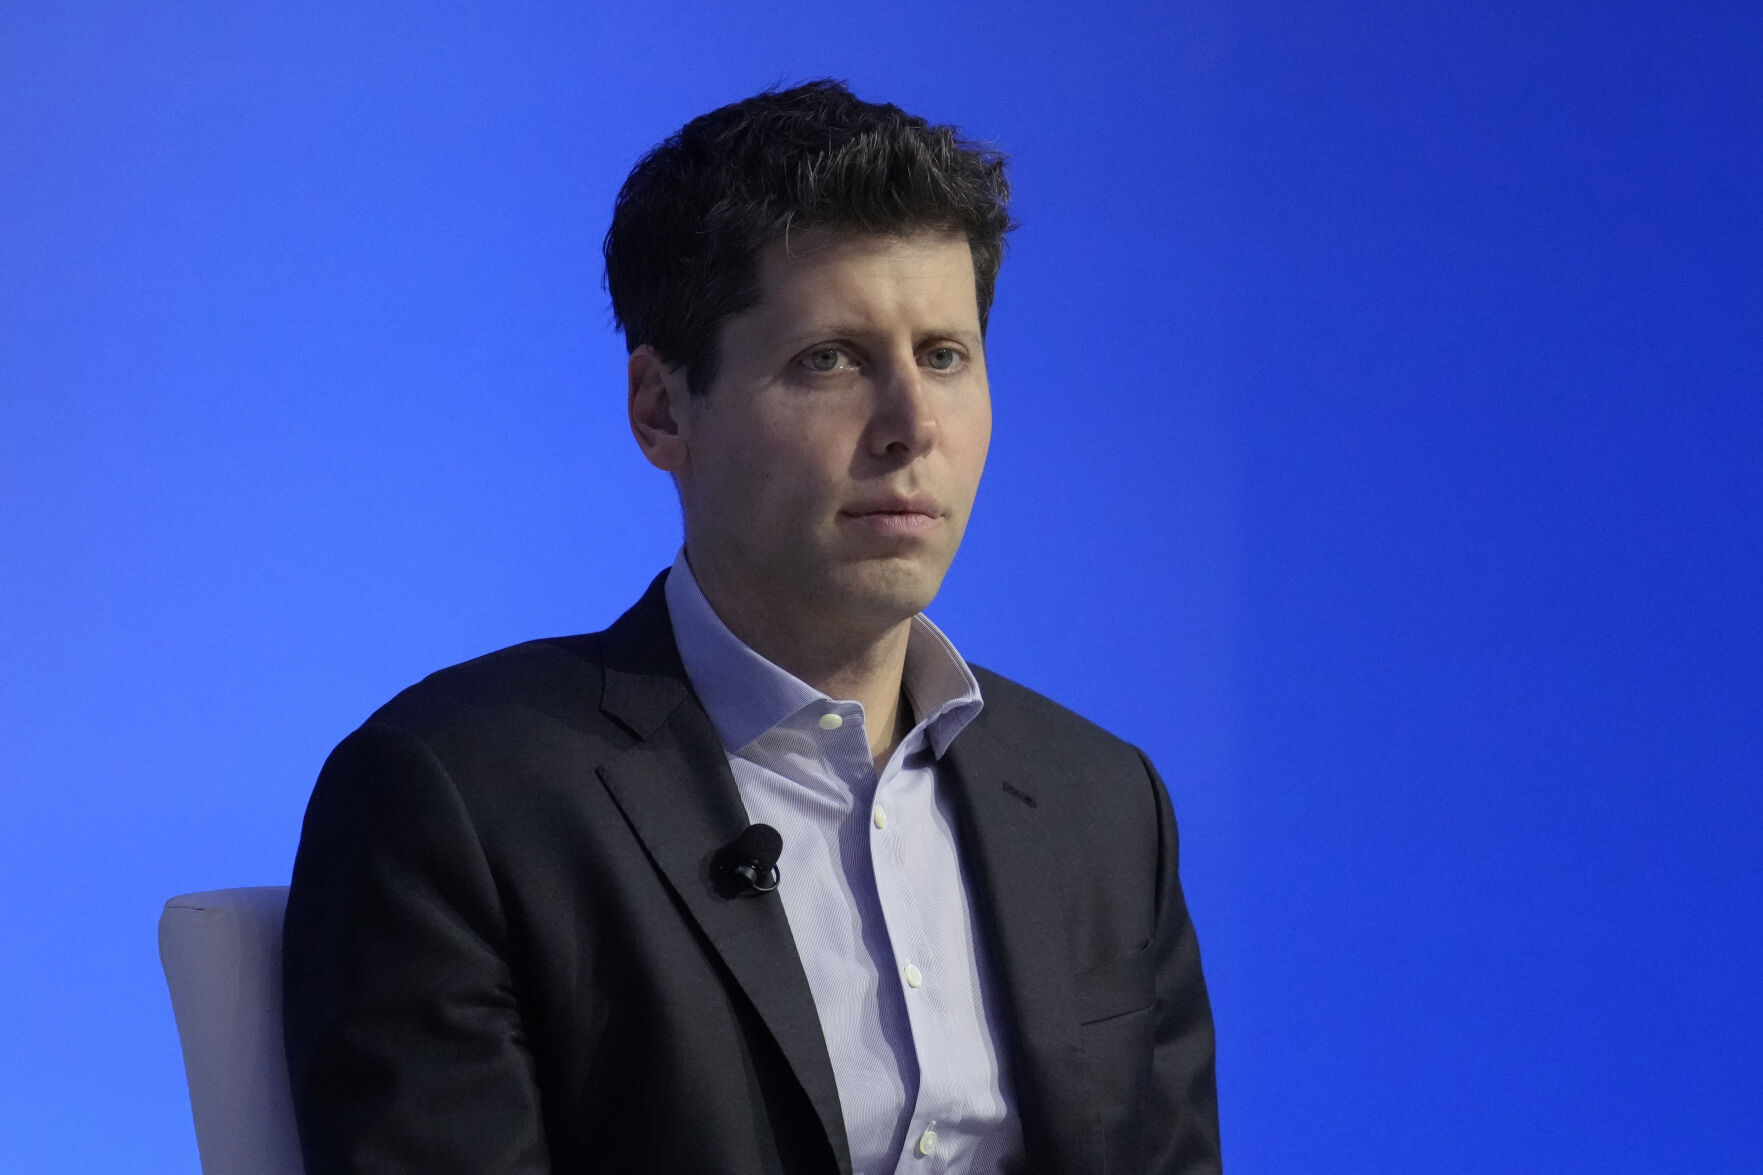 FILE - OpenAI CEO Sam Altman participates in a discussion during the Asia-Pacific Economic Cooperation (APEC) CEO Summit, Nov. 16, 2023, in San Francisco. Altman, the ousted leader of ChatGPT-maker OpenAI, is returning to the company that fired him late last week, the latest in a saga that has shocked the artificial intelligence industry. San Francisco-based OpenAI said in a statement late Tuesday, Nov. 21: “We have reached an agreement in principle for Sam Altman to return to OpenAI as CEO with a new initial board of Bret Taylor (Chair), Larry Summers, and Adam D’Angelo.” (AP Photo/Eric Risberg, File)    PHOTO CREDIT: Associated Press